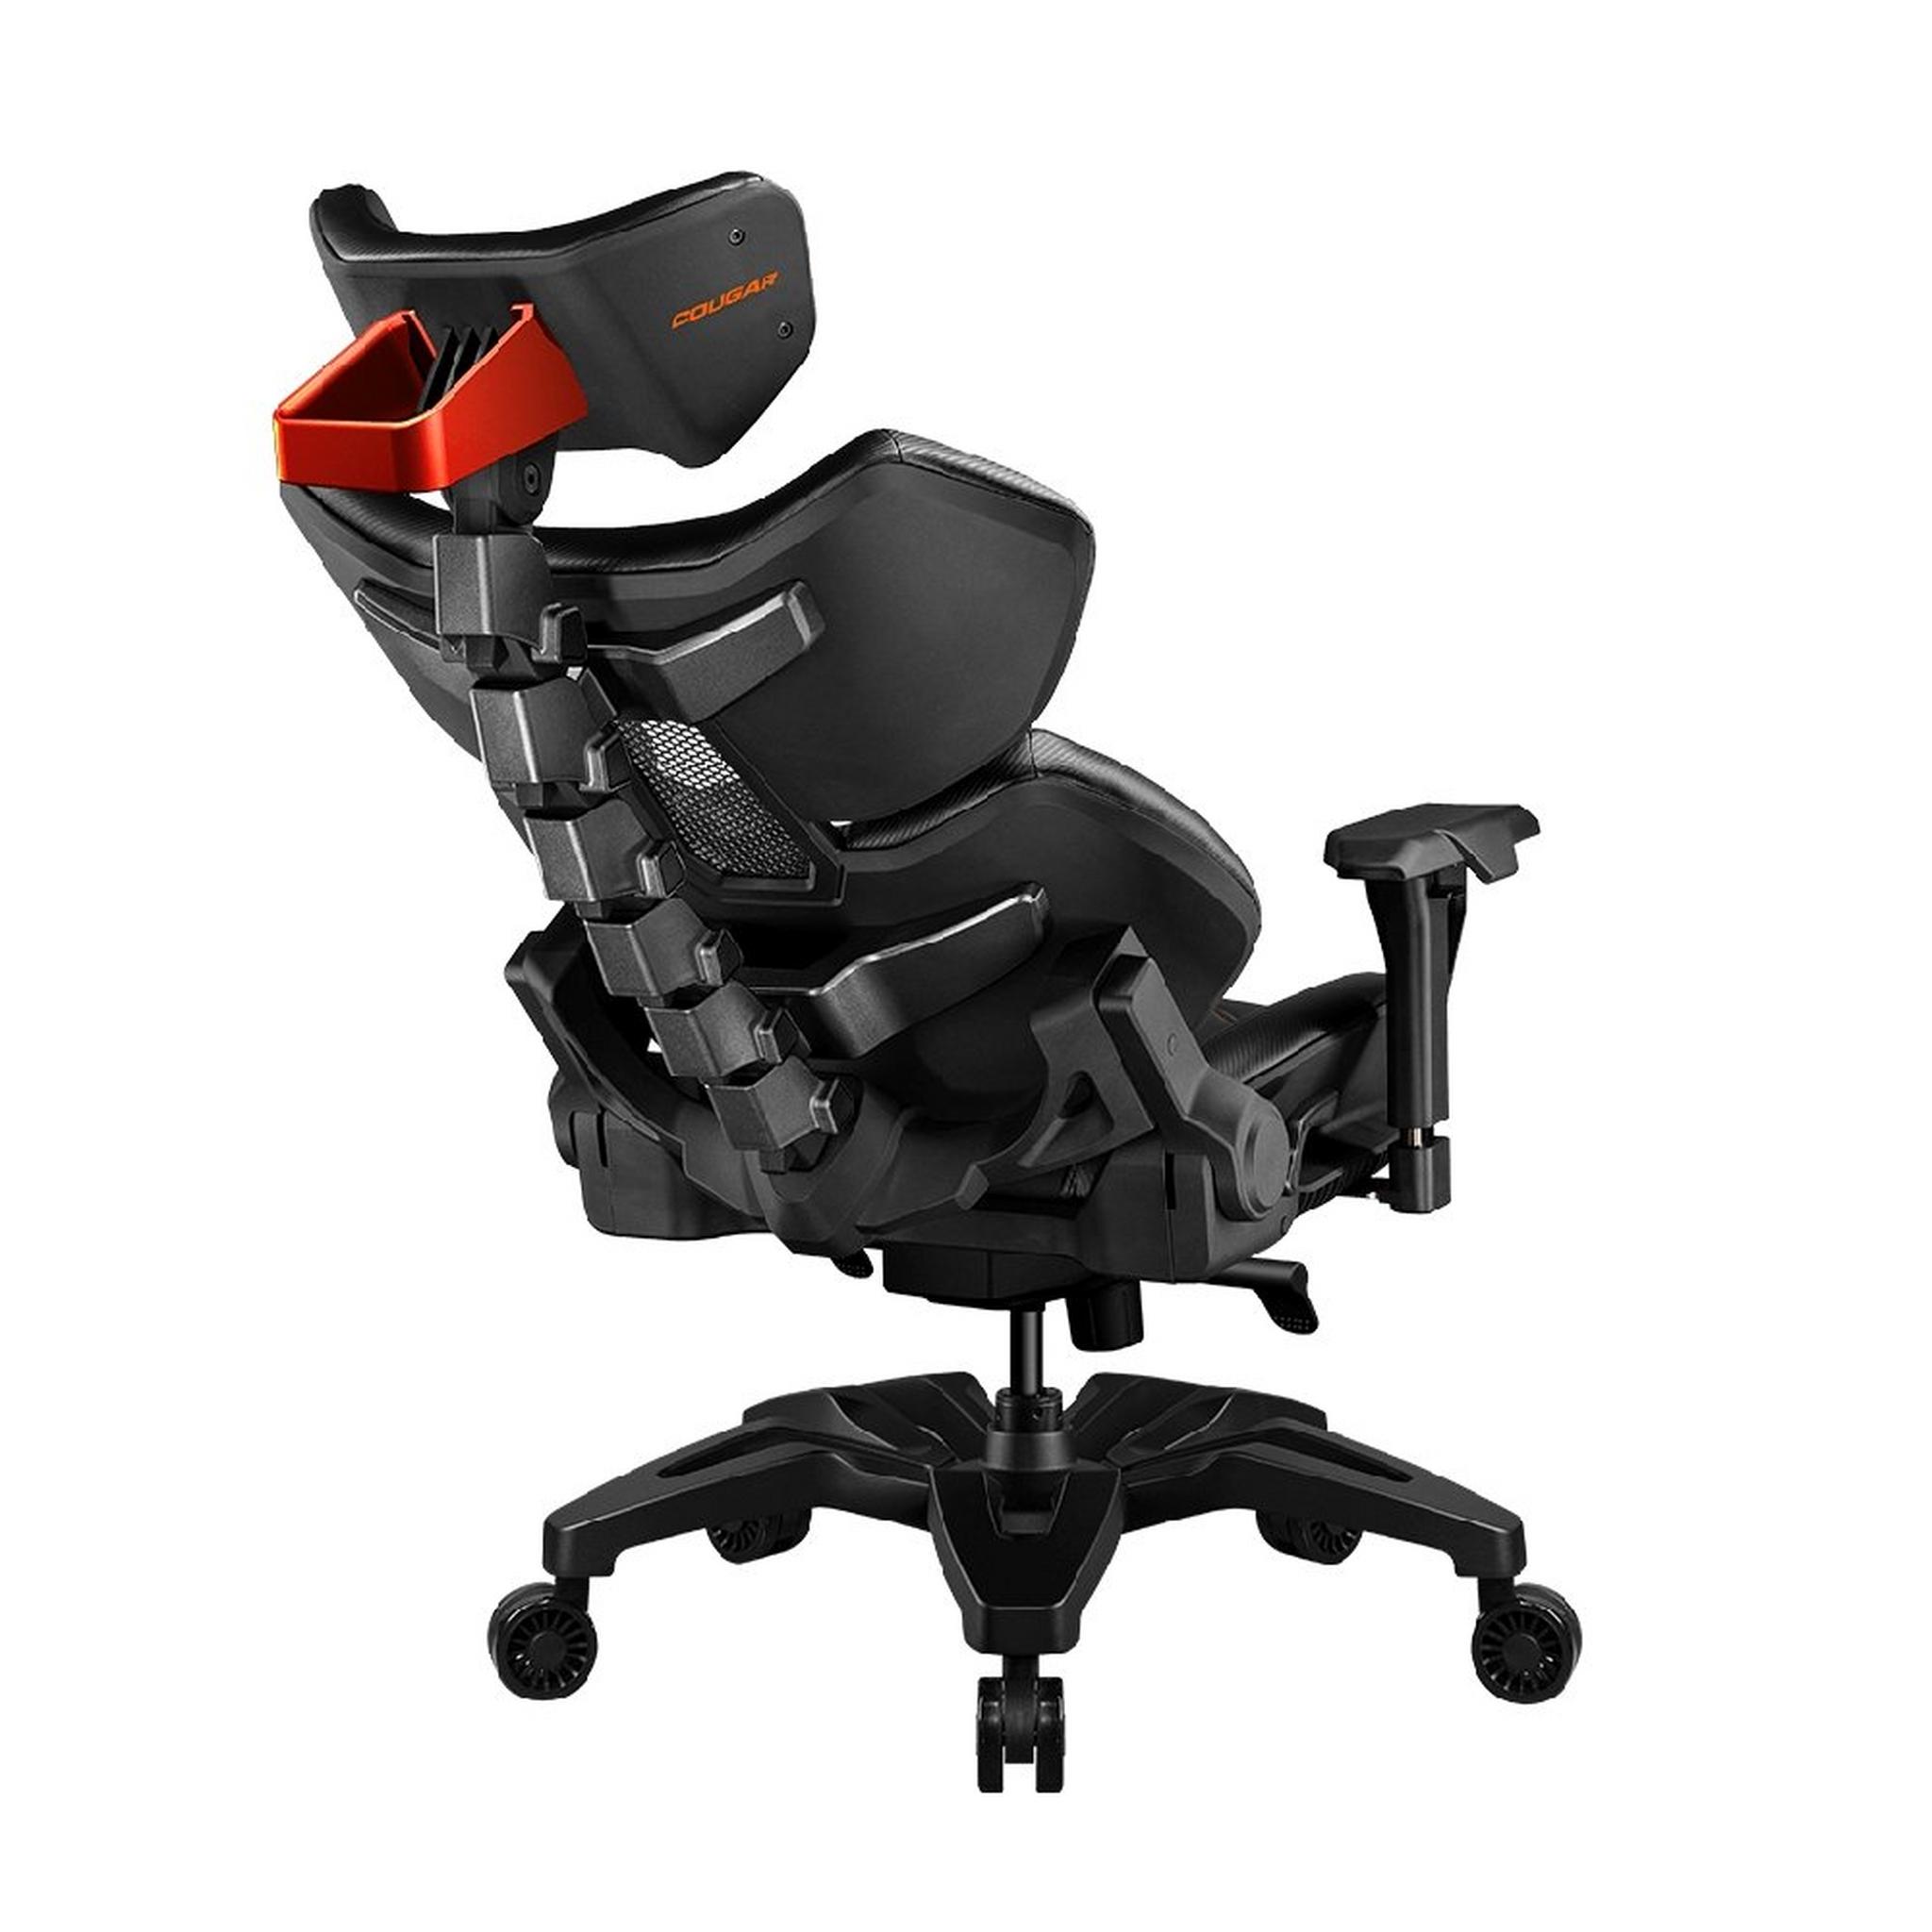 COUGAR Terminator Unprecedented Revolution of the Gaming Chair with Unique Mechanical Aesthetics